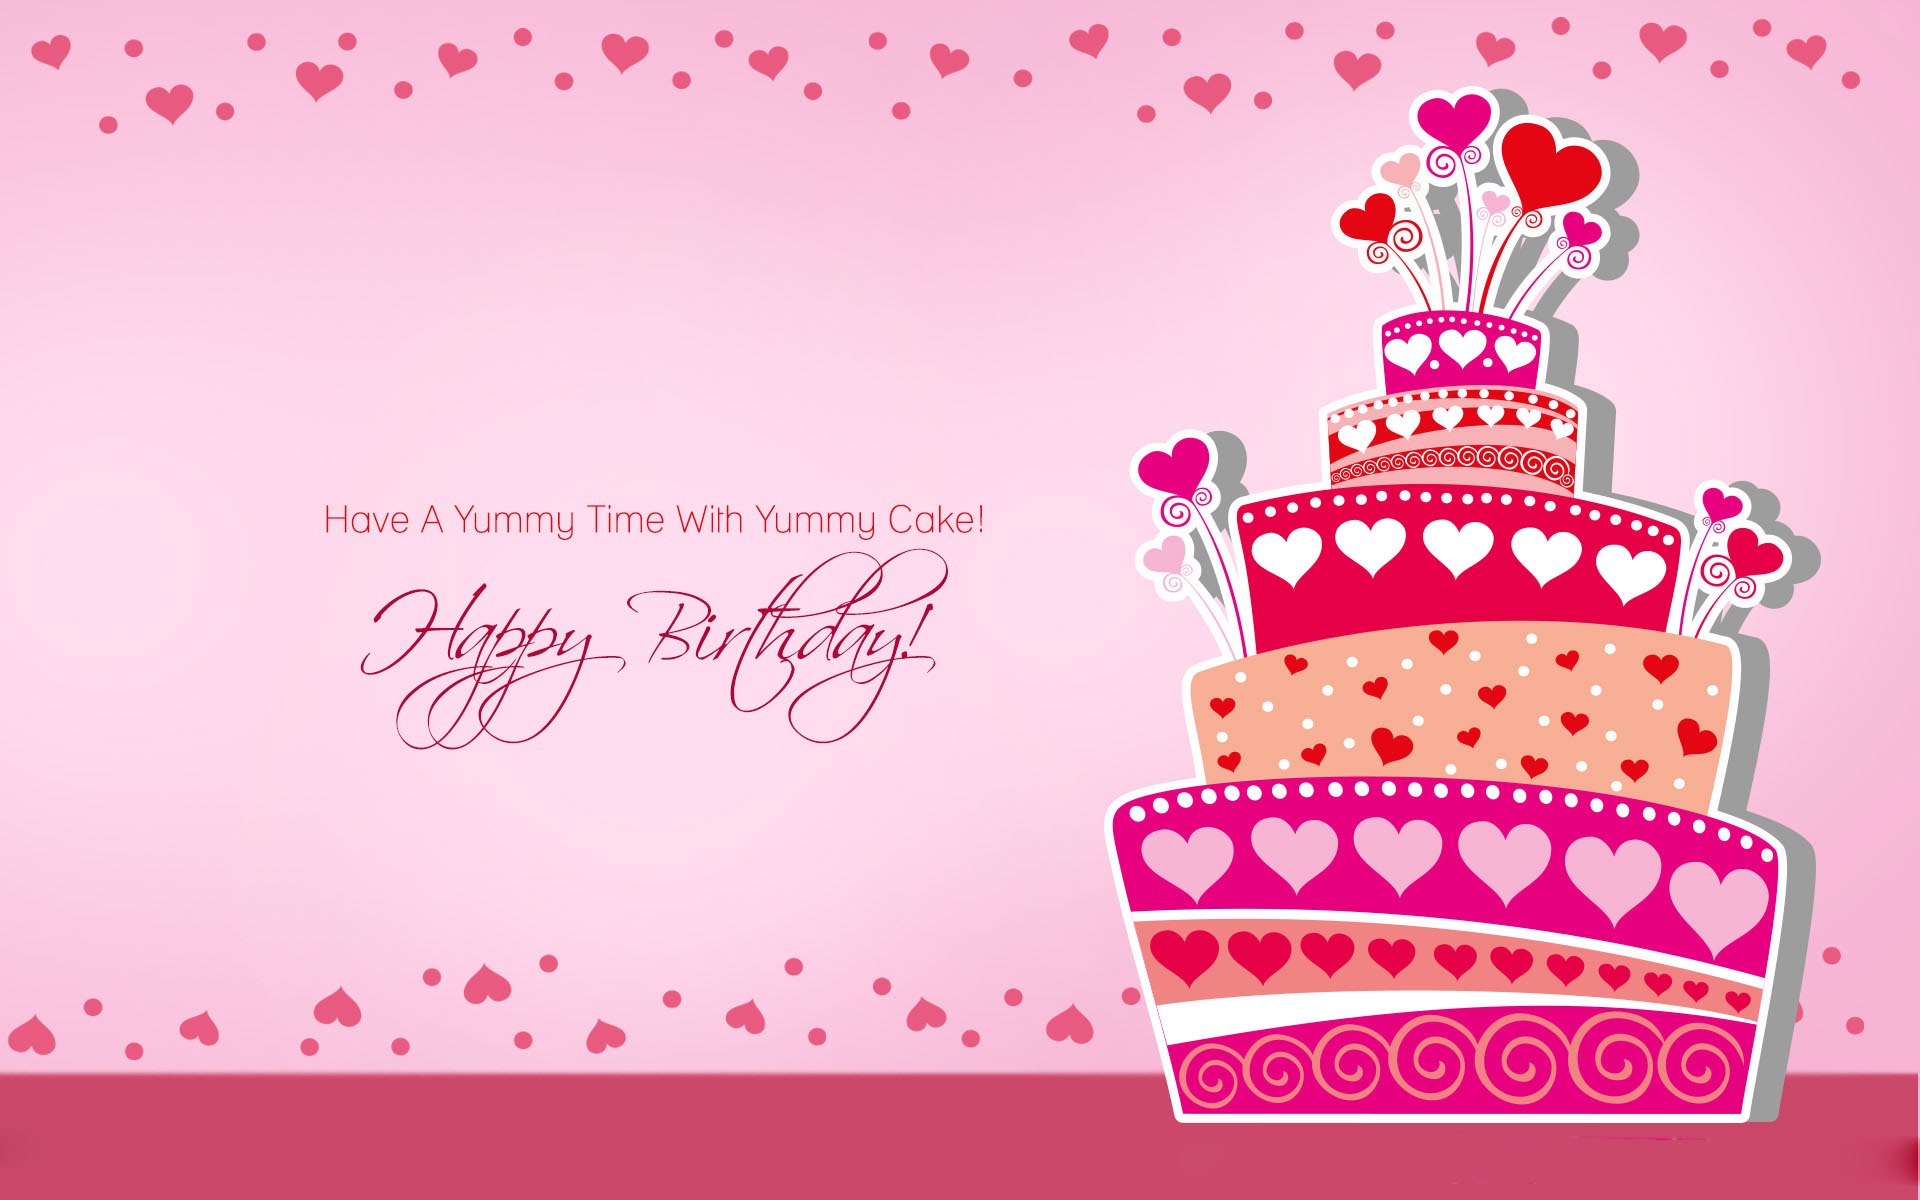 Happy birthday best wishes cake and quotes HD Wallpapers Rocks